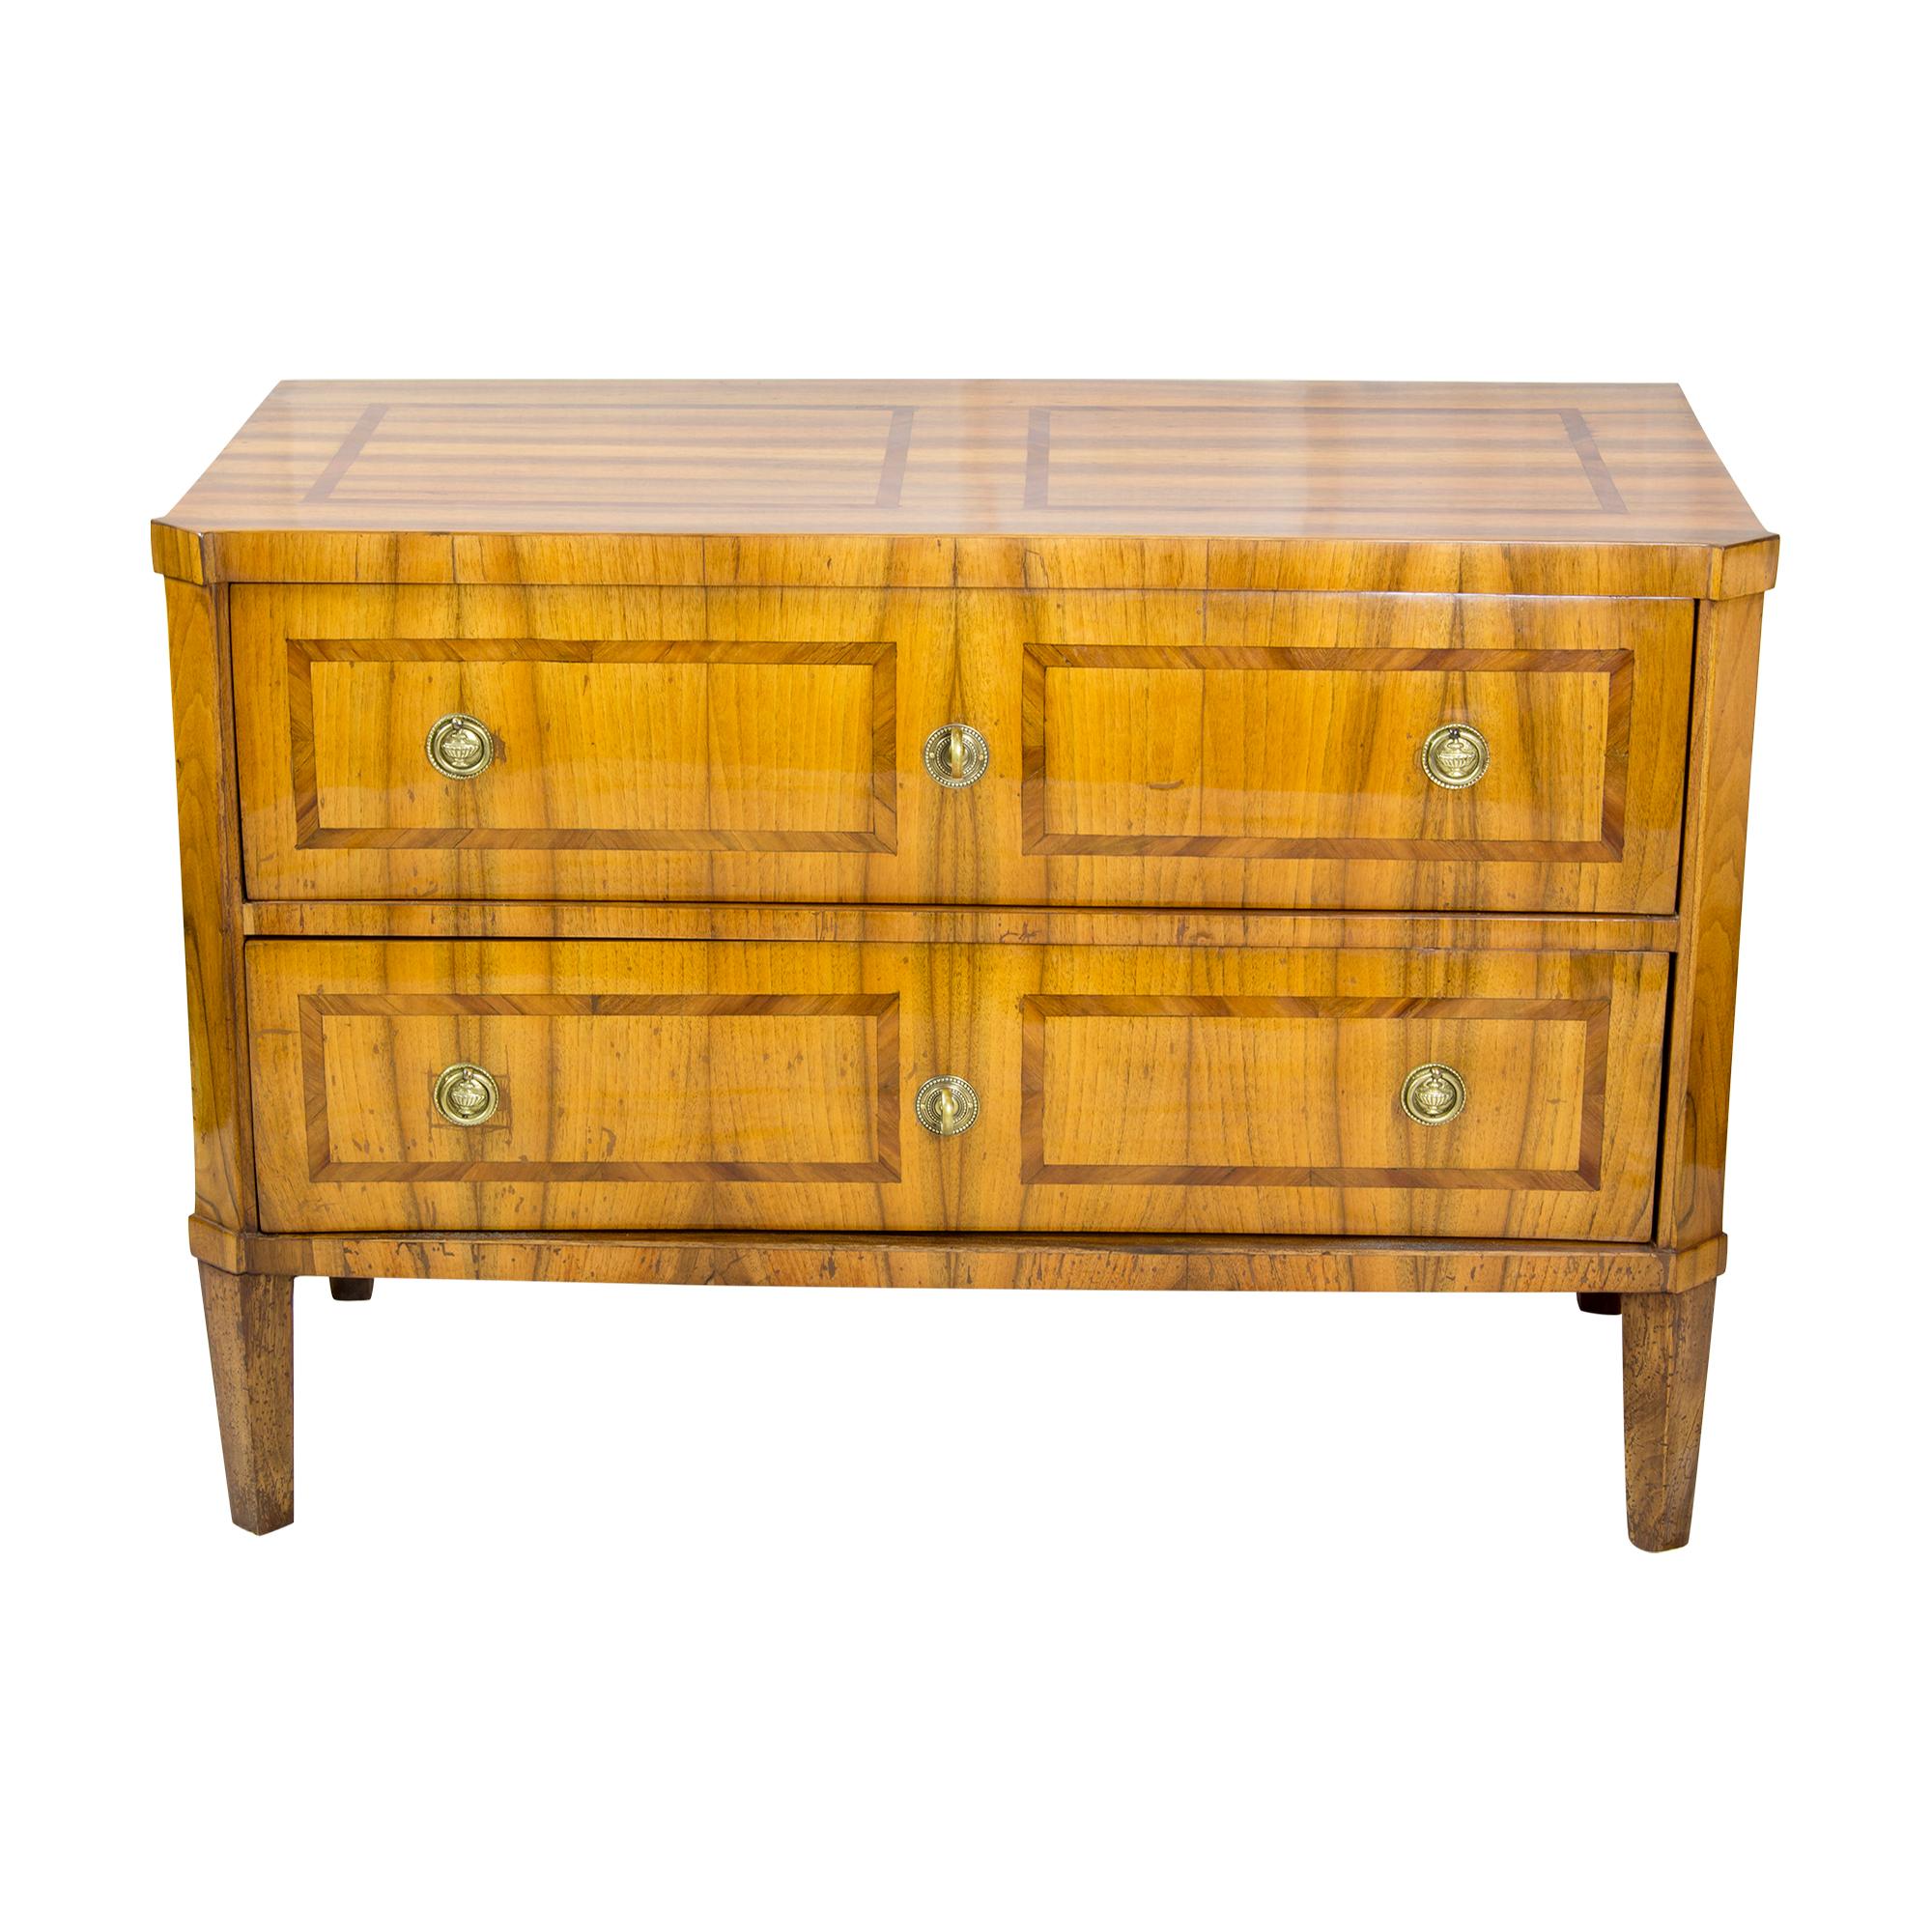 Chest of drawers with two drawers on pointed feet. Beautiful walnut veneer with ribbon inlays on pine body. The furniture has a very clear beautiful design without much ornamentation and comes from the Empire period and has with its gradliniegkeit